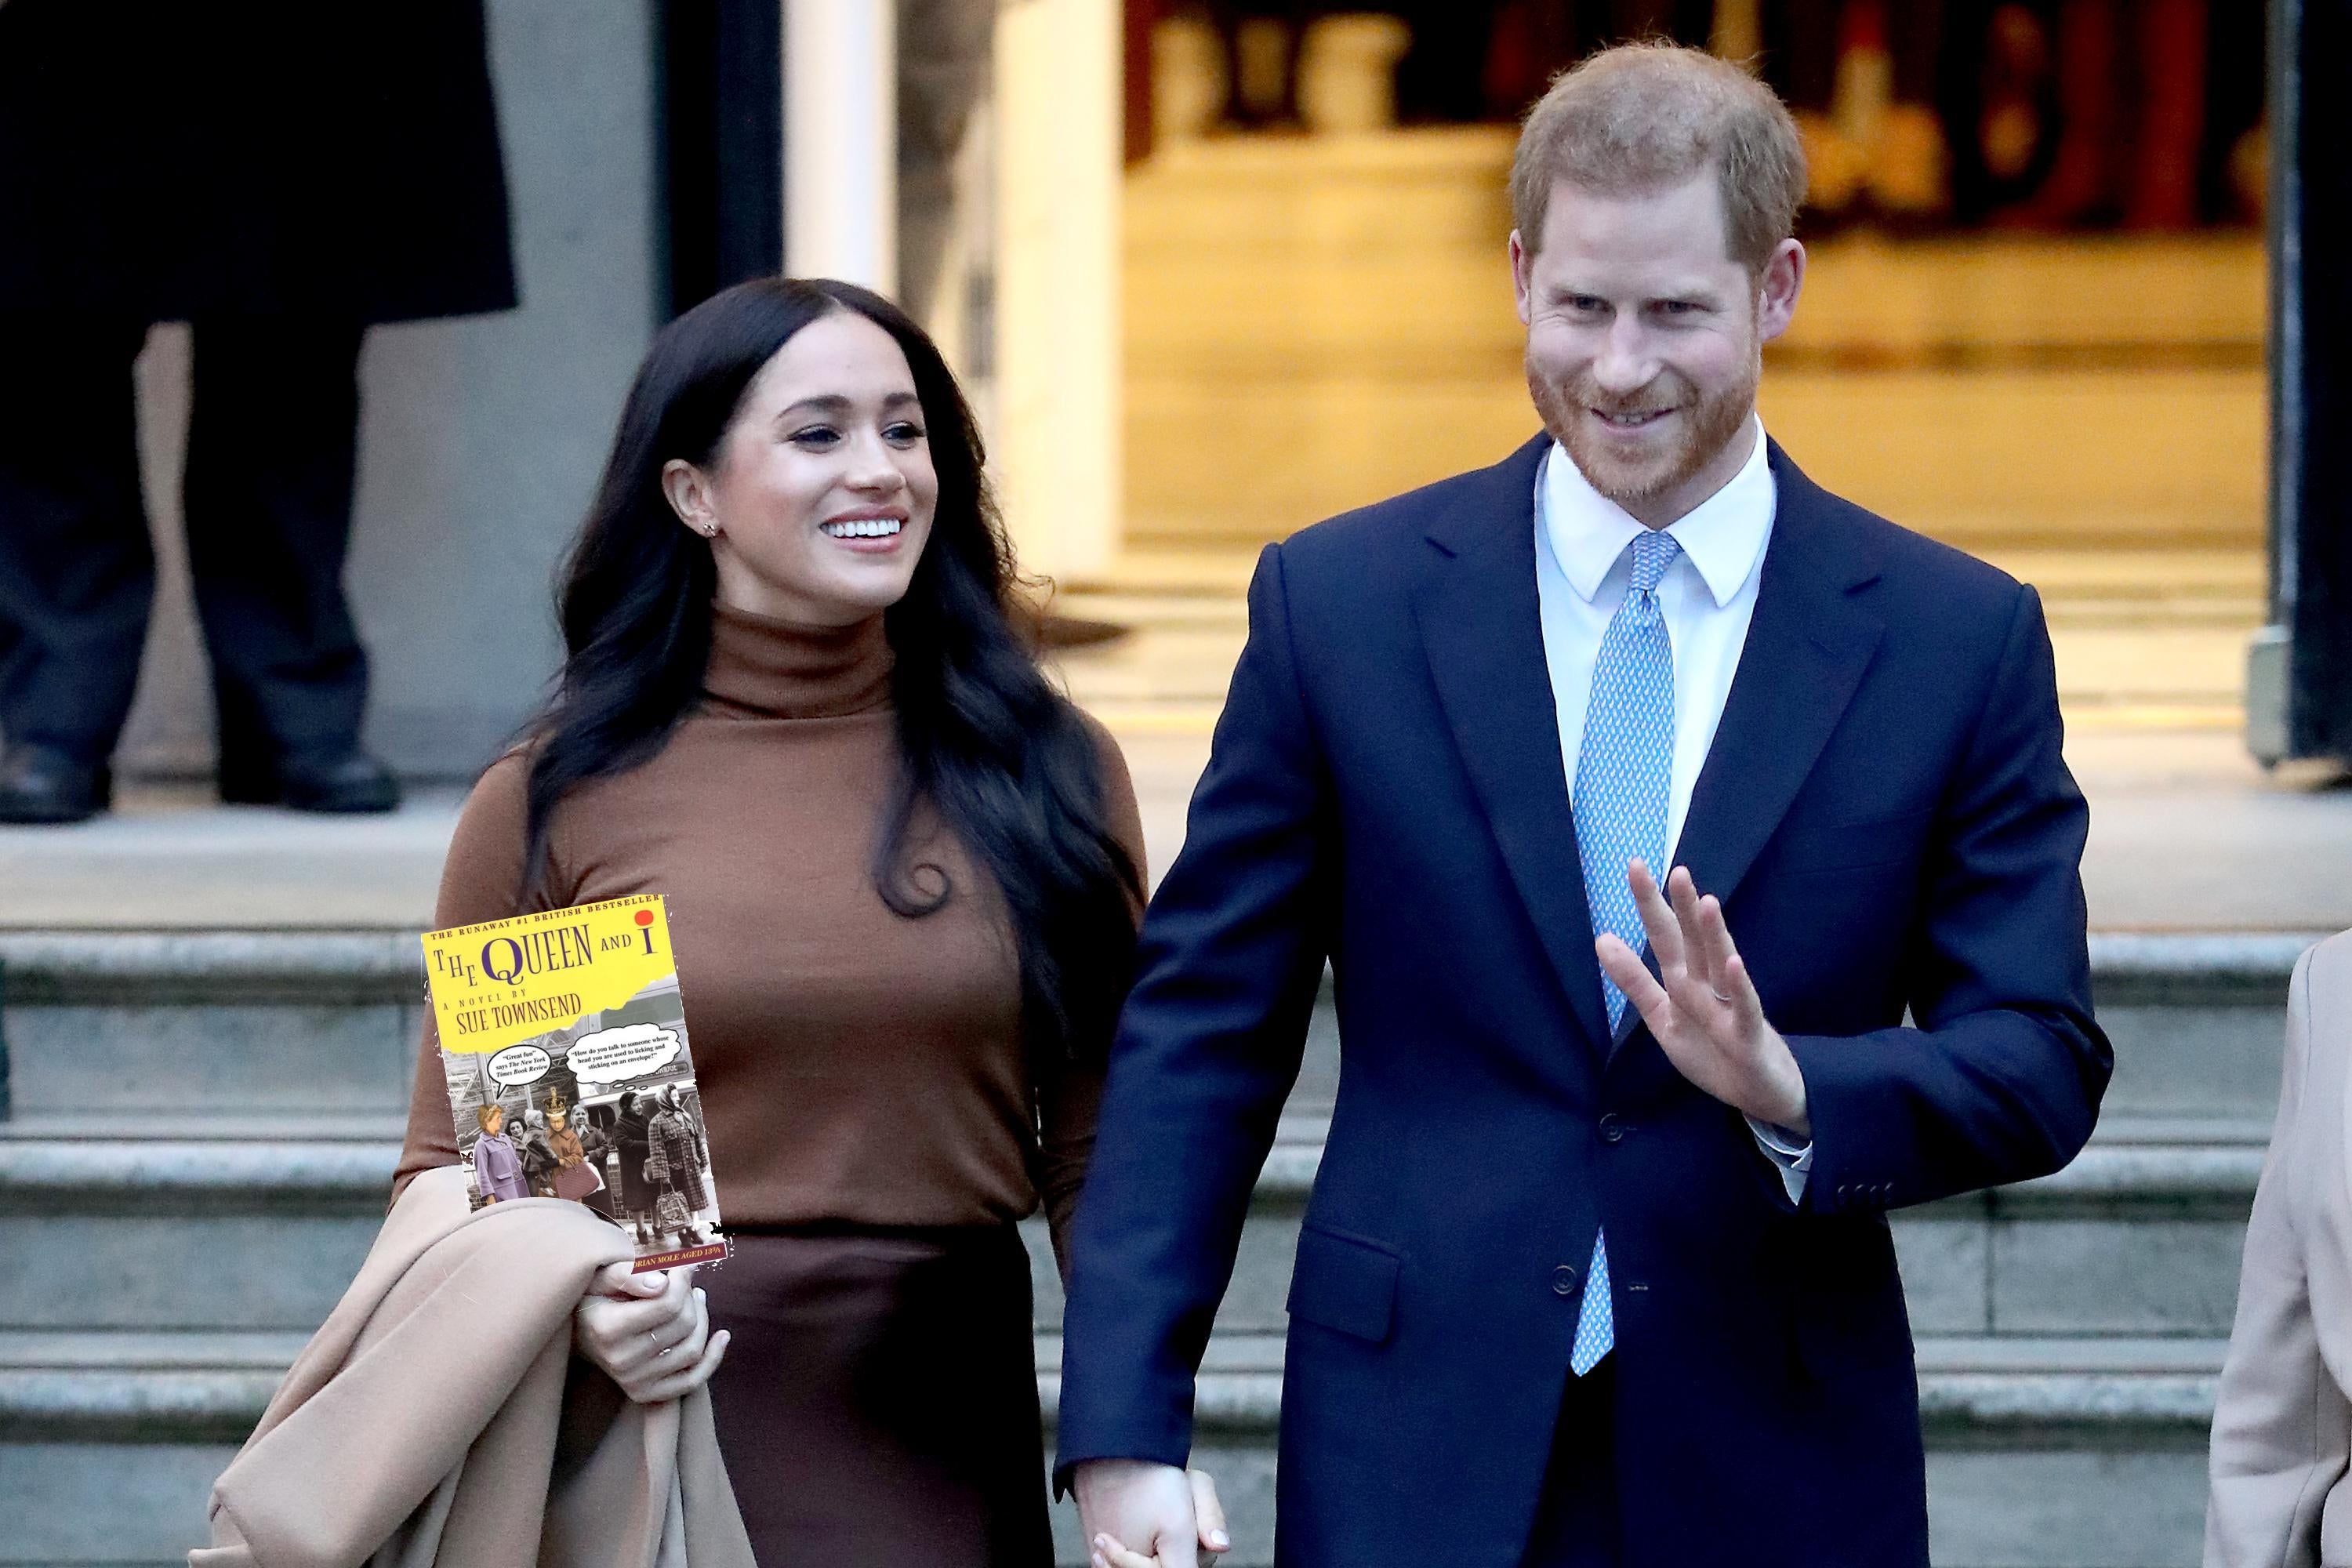 Harry and Meghan hold a copy of "The Queen and I."